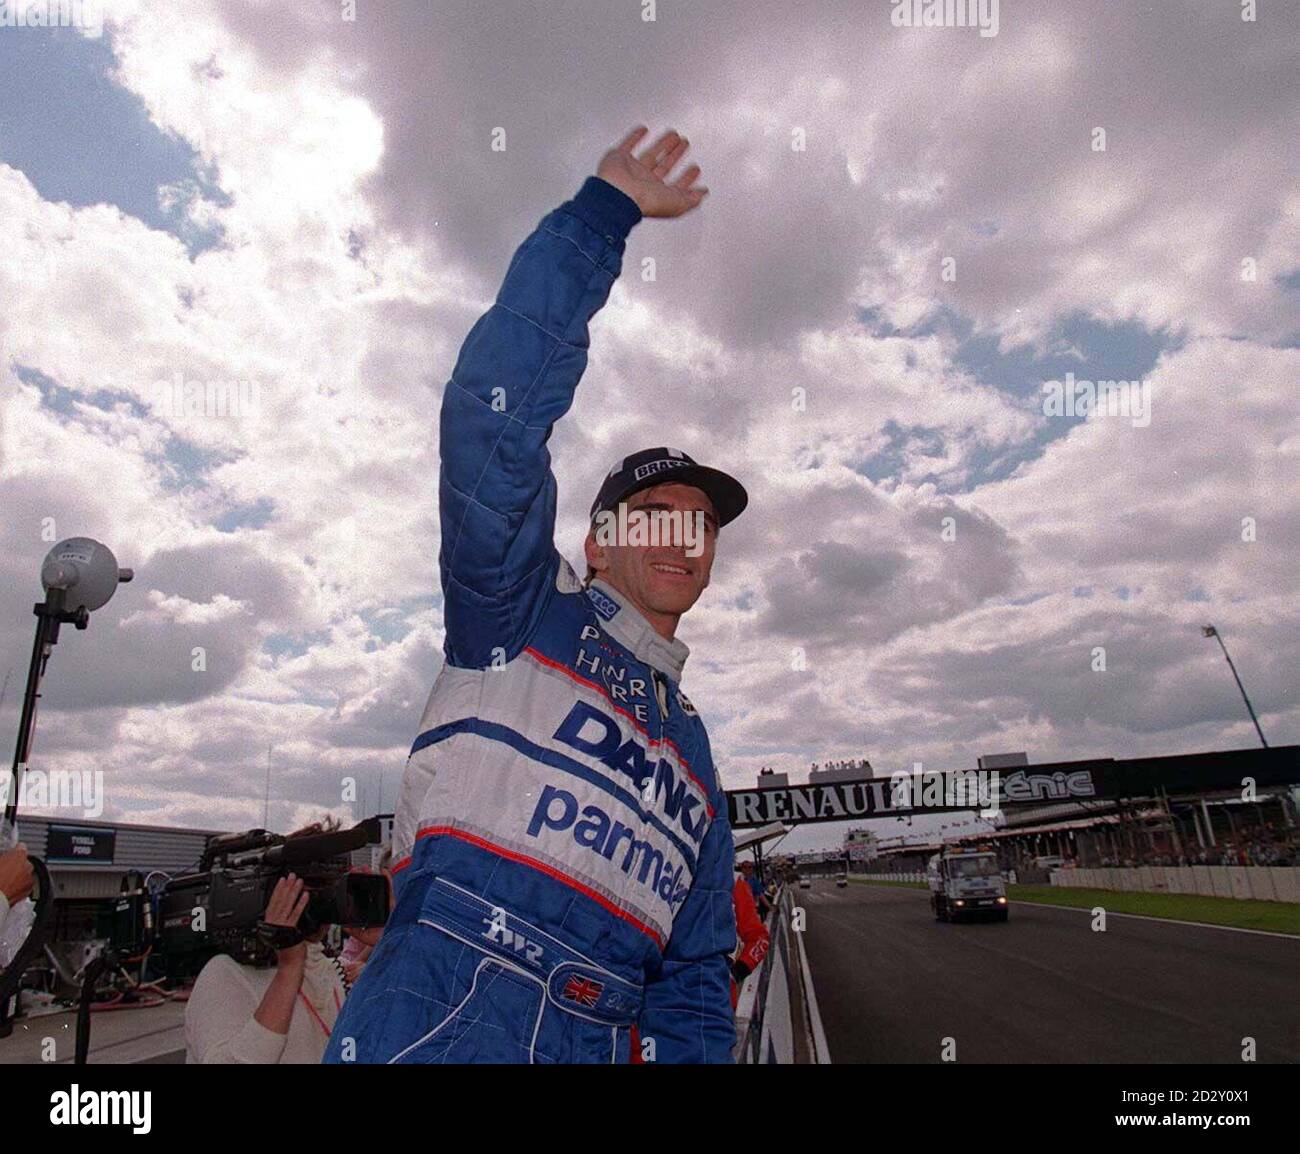 https://c8.alamy.com/comp/2D2Y0X1/damon-hill-waves-to-the-crowd-after-he-gained-his-first-formula-1-championship-points-at-silverstone-today-sunday-picture-david-jonespa-2D2Y0X1.jpg